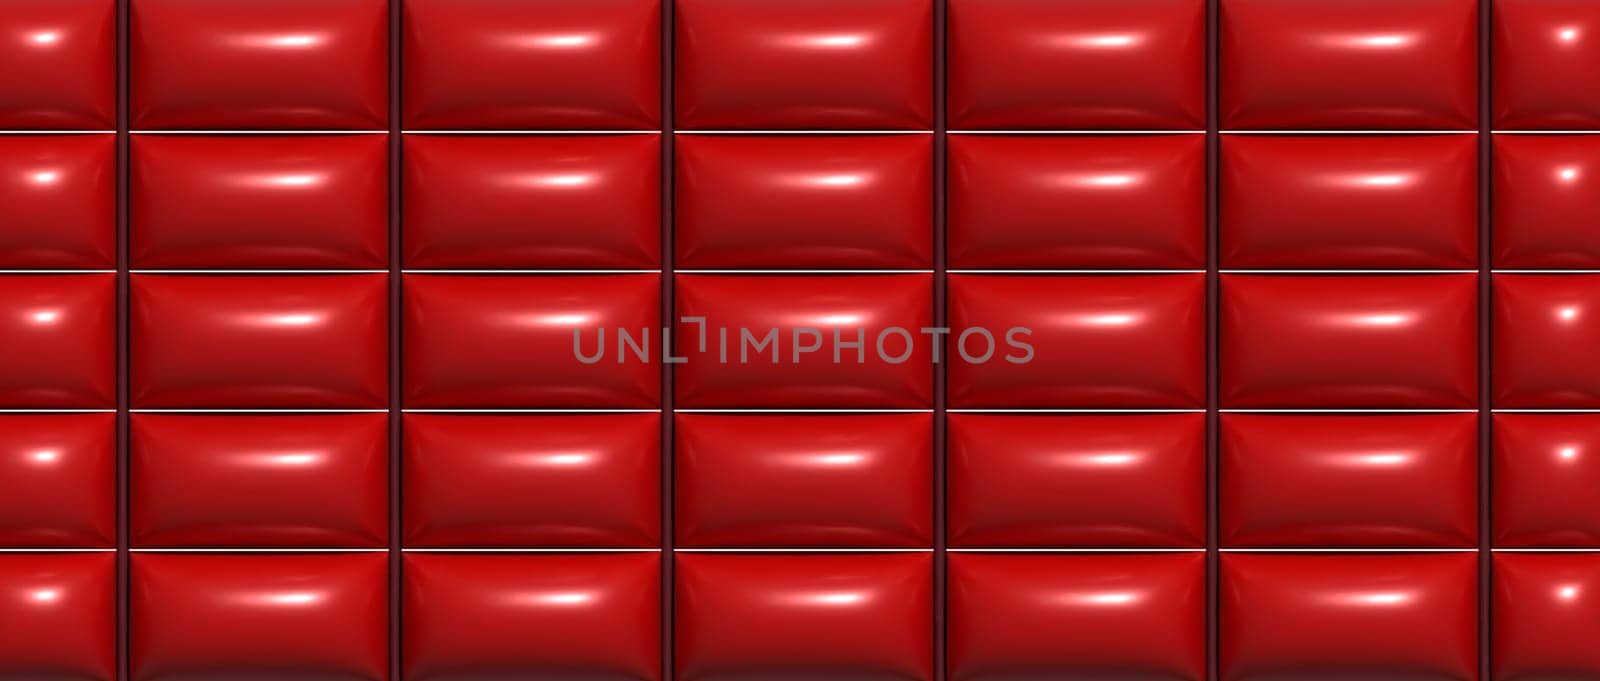 Abstract red background with inflated cells, 3D rendering illustration